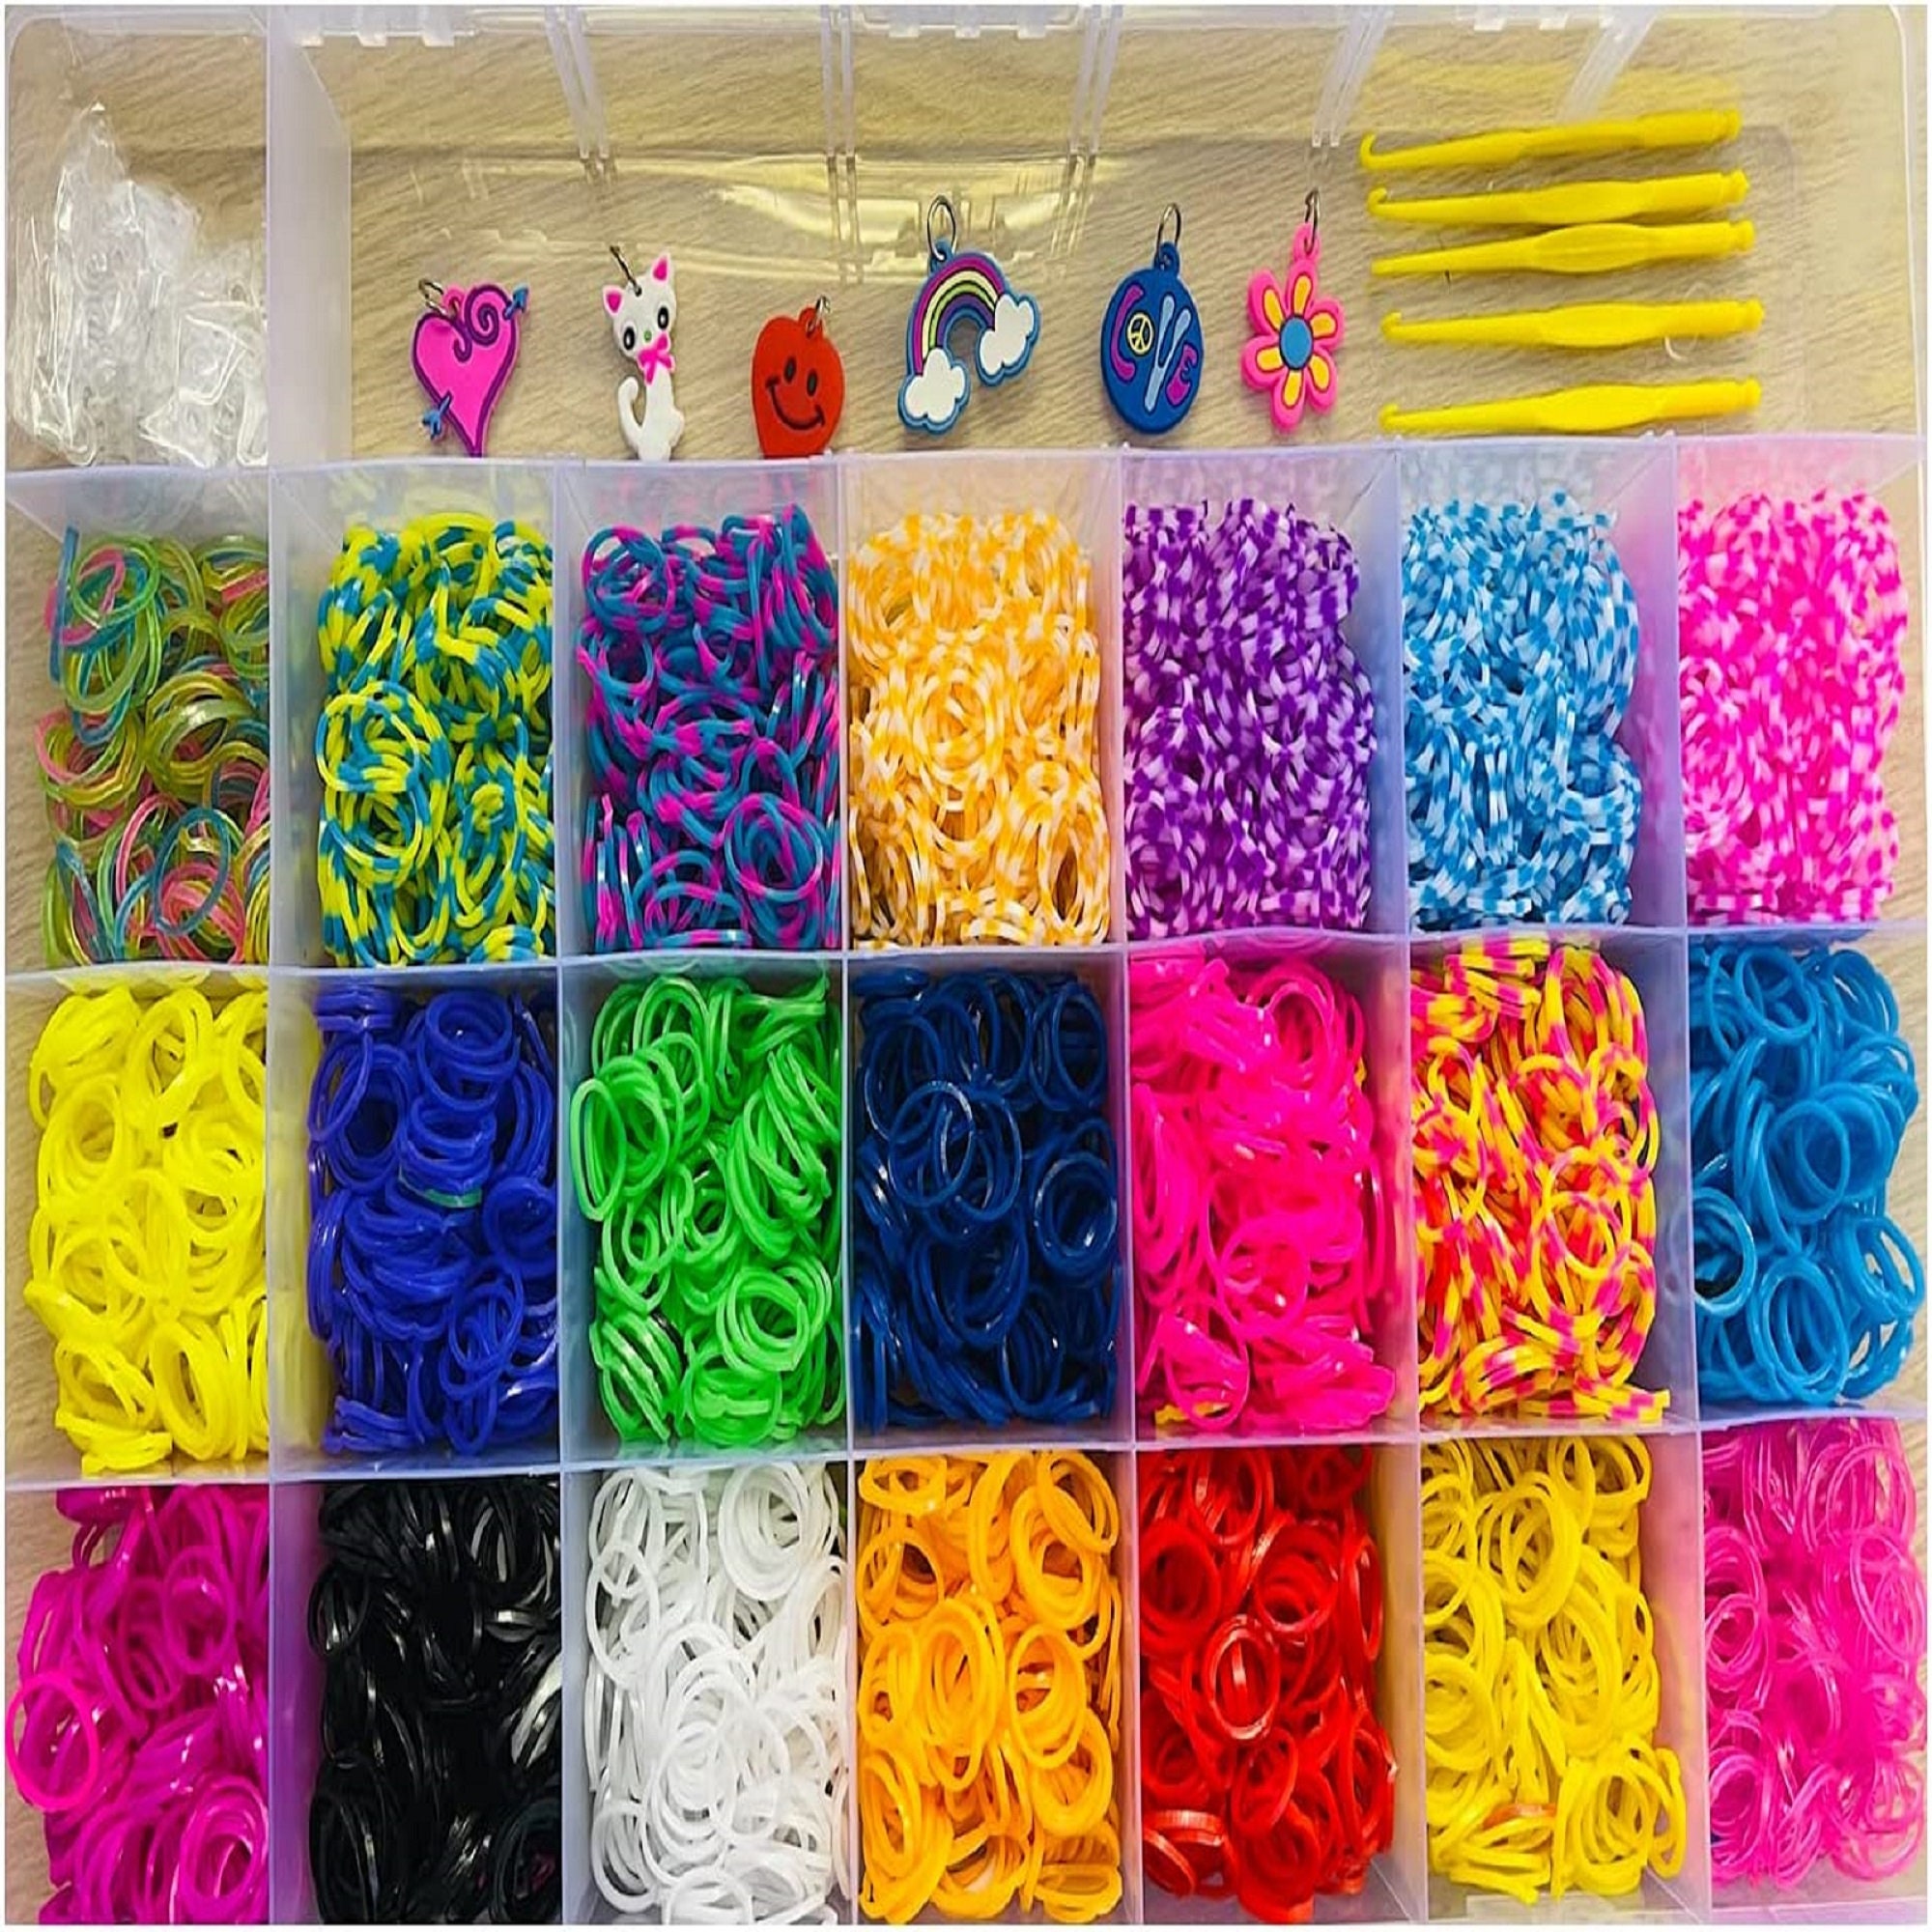 wuxiaobo 5000 Colorful Loom Band Set Rainbow Rubber Bands Premium Rubber Bands Bracelet Making DIY Kit Girls Gift to Improve Imagination 